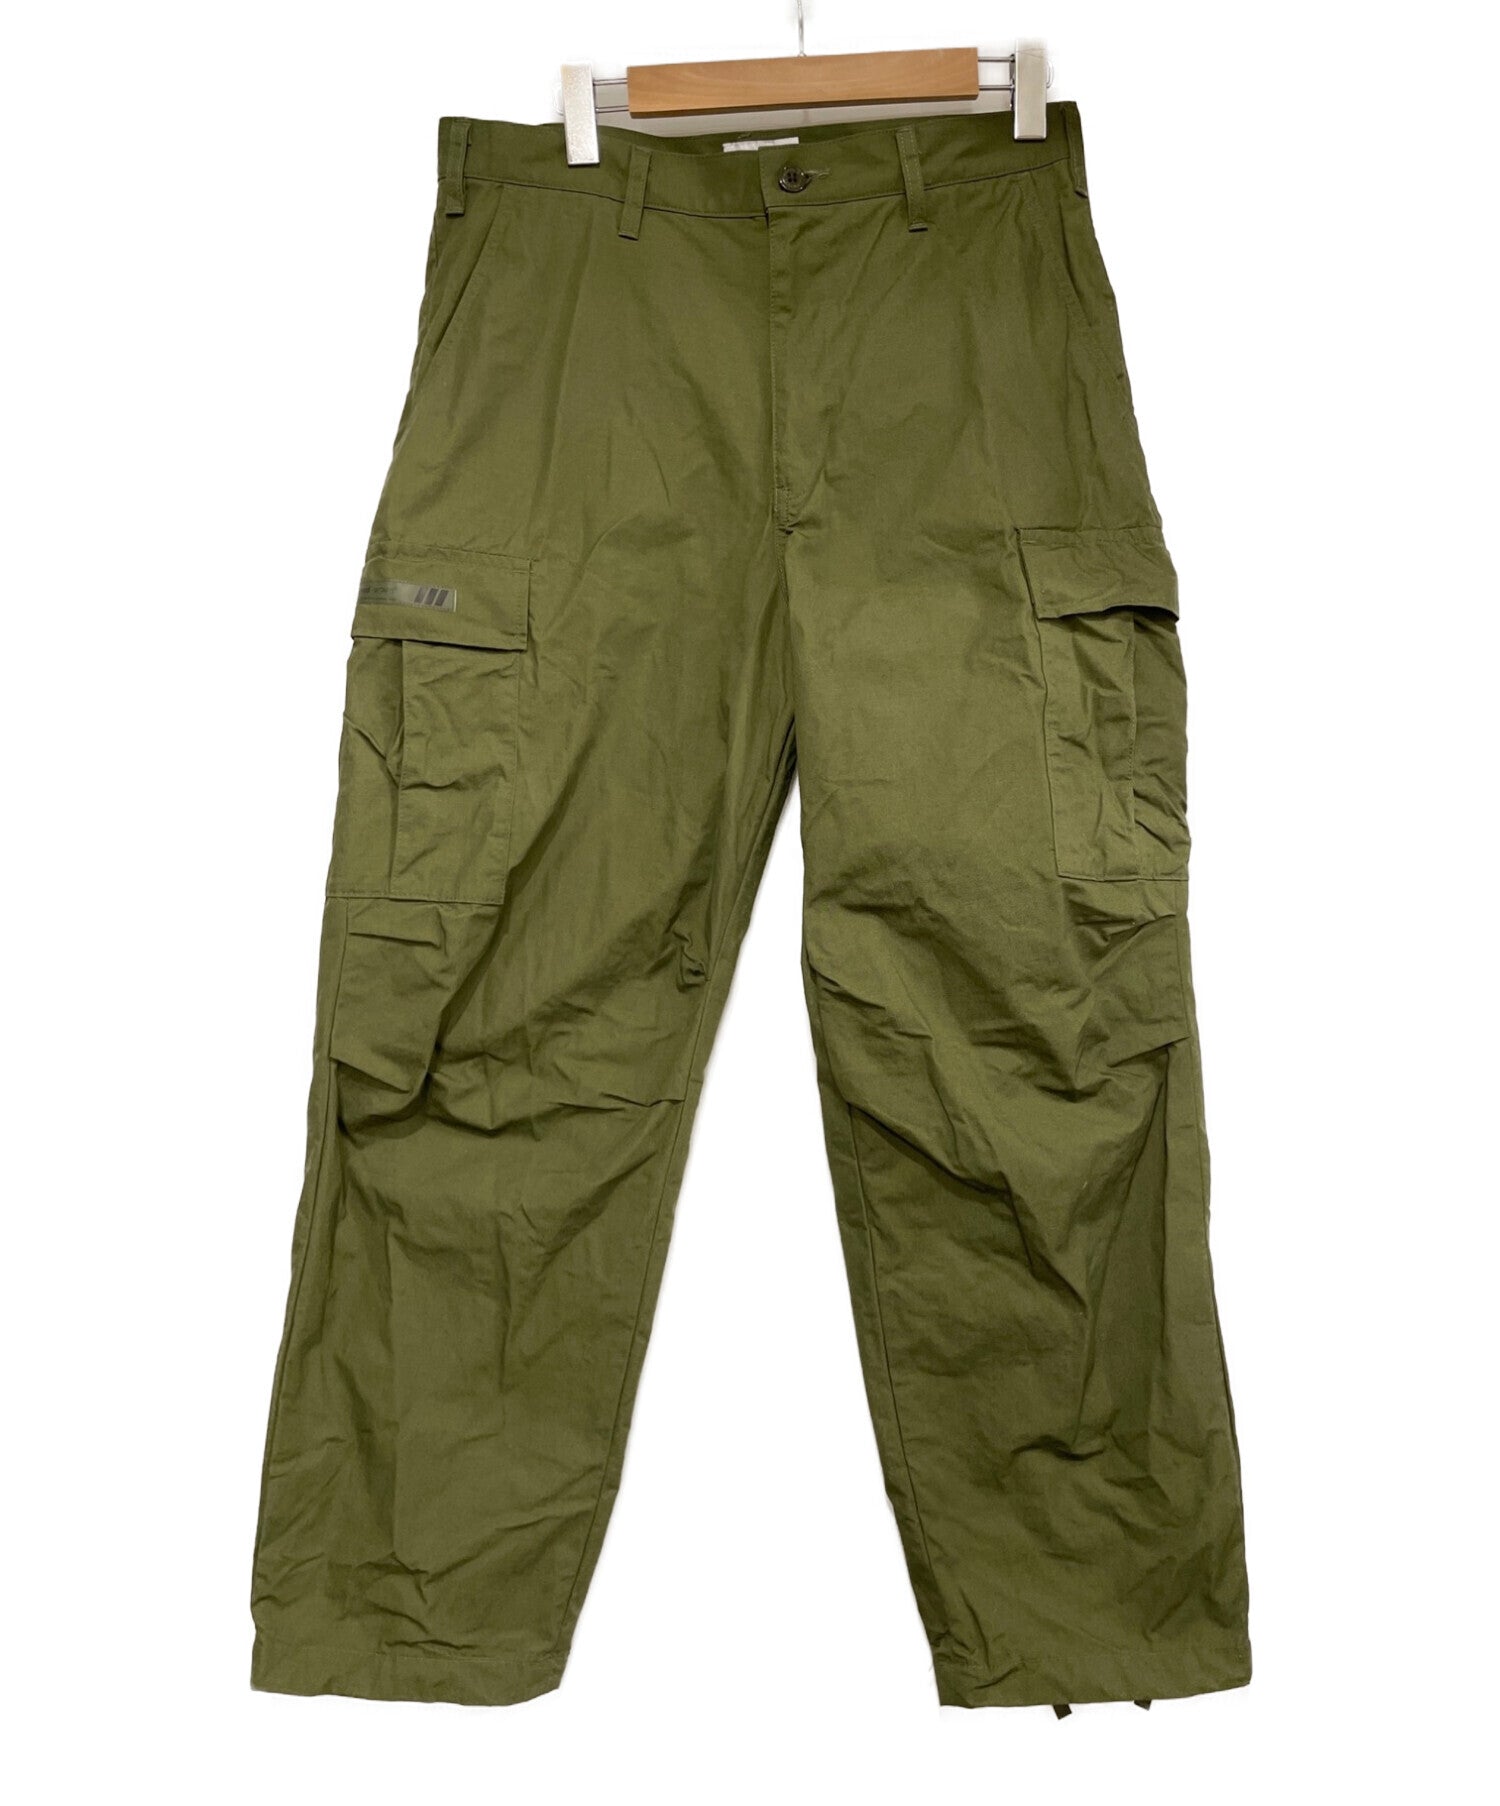 WTAPS JUNGLE STOCK TROUSERS 222wvdt-ptm07